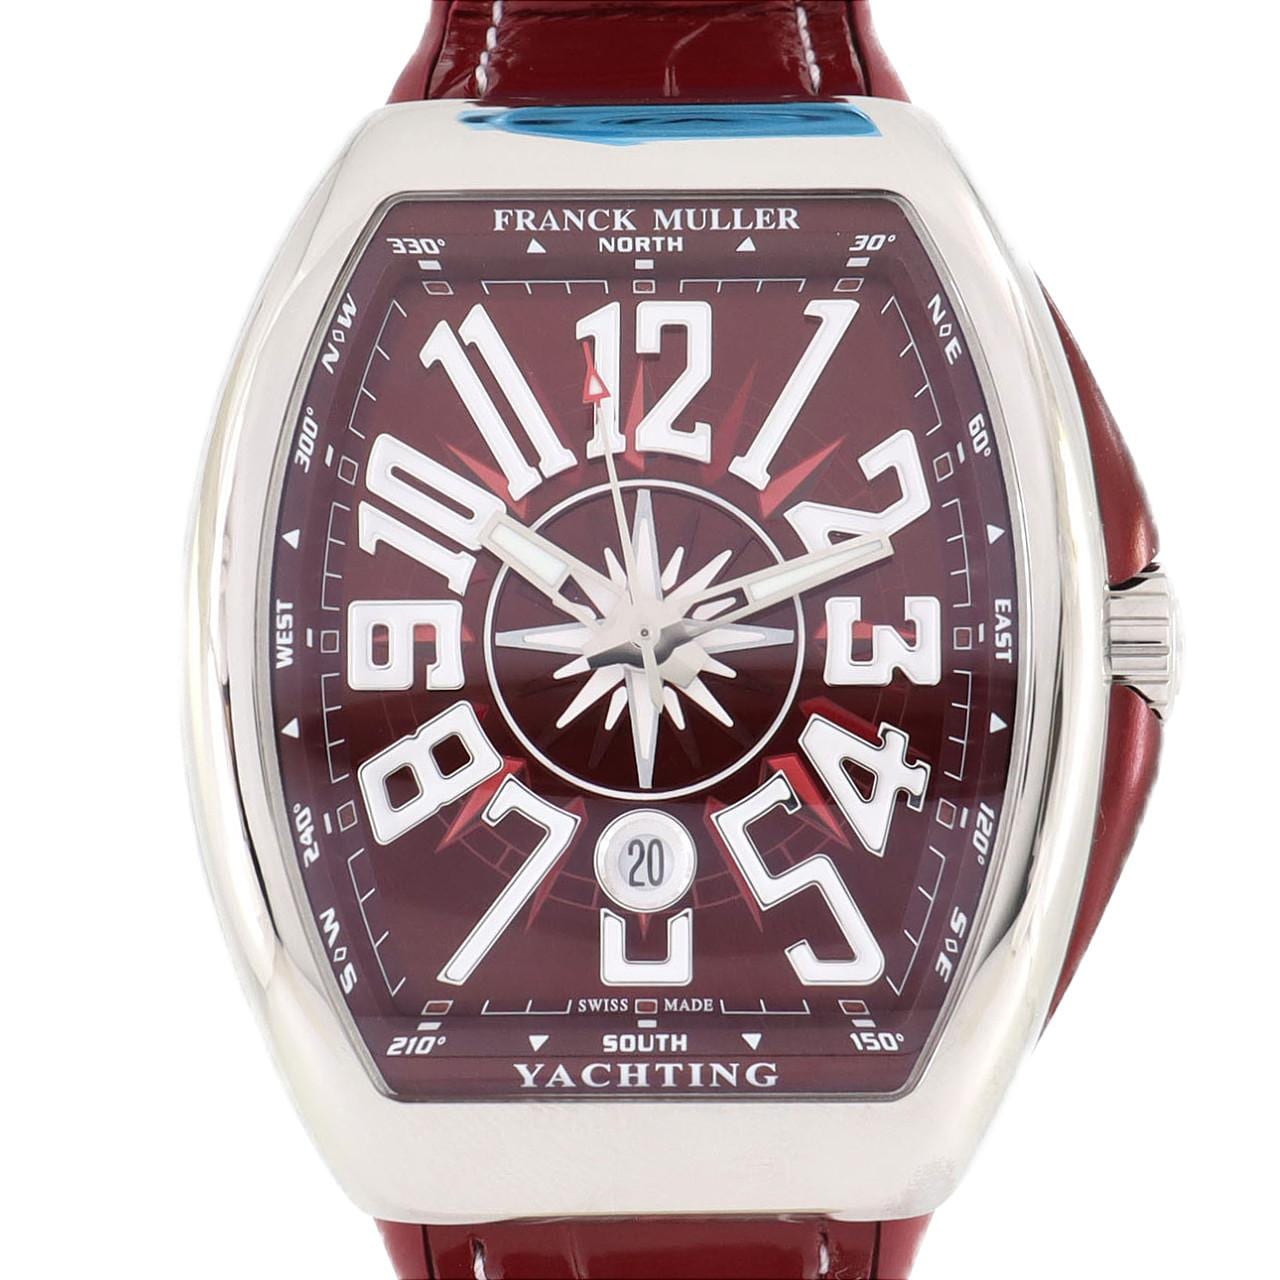 [BRAND NEW] FRANCK MULLER Vanguard Yachting V45SCDTACBO SS Automatic